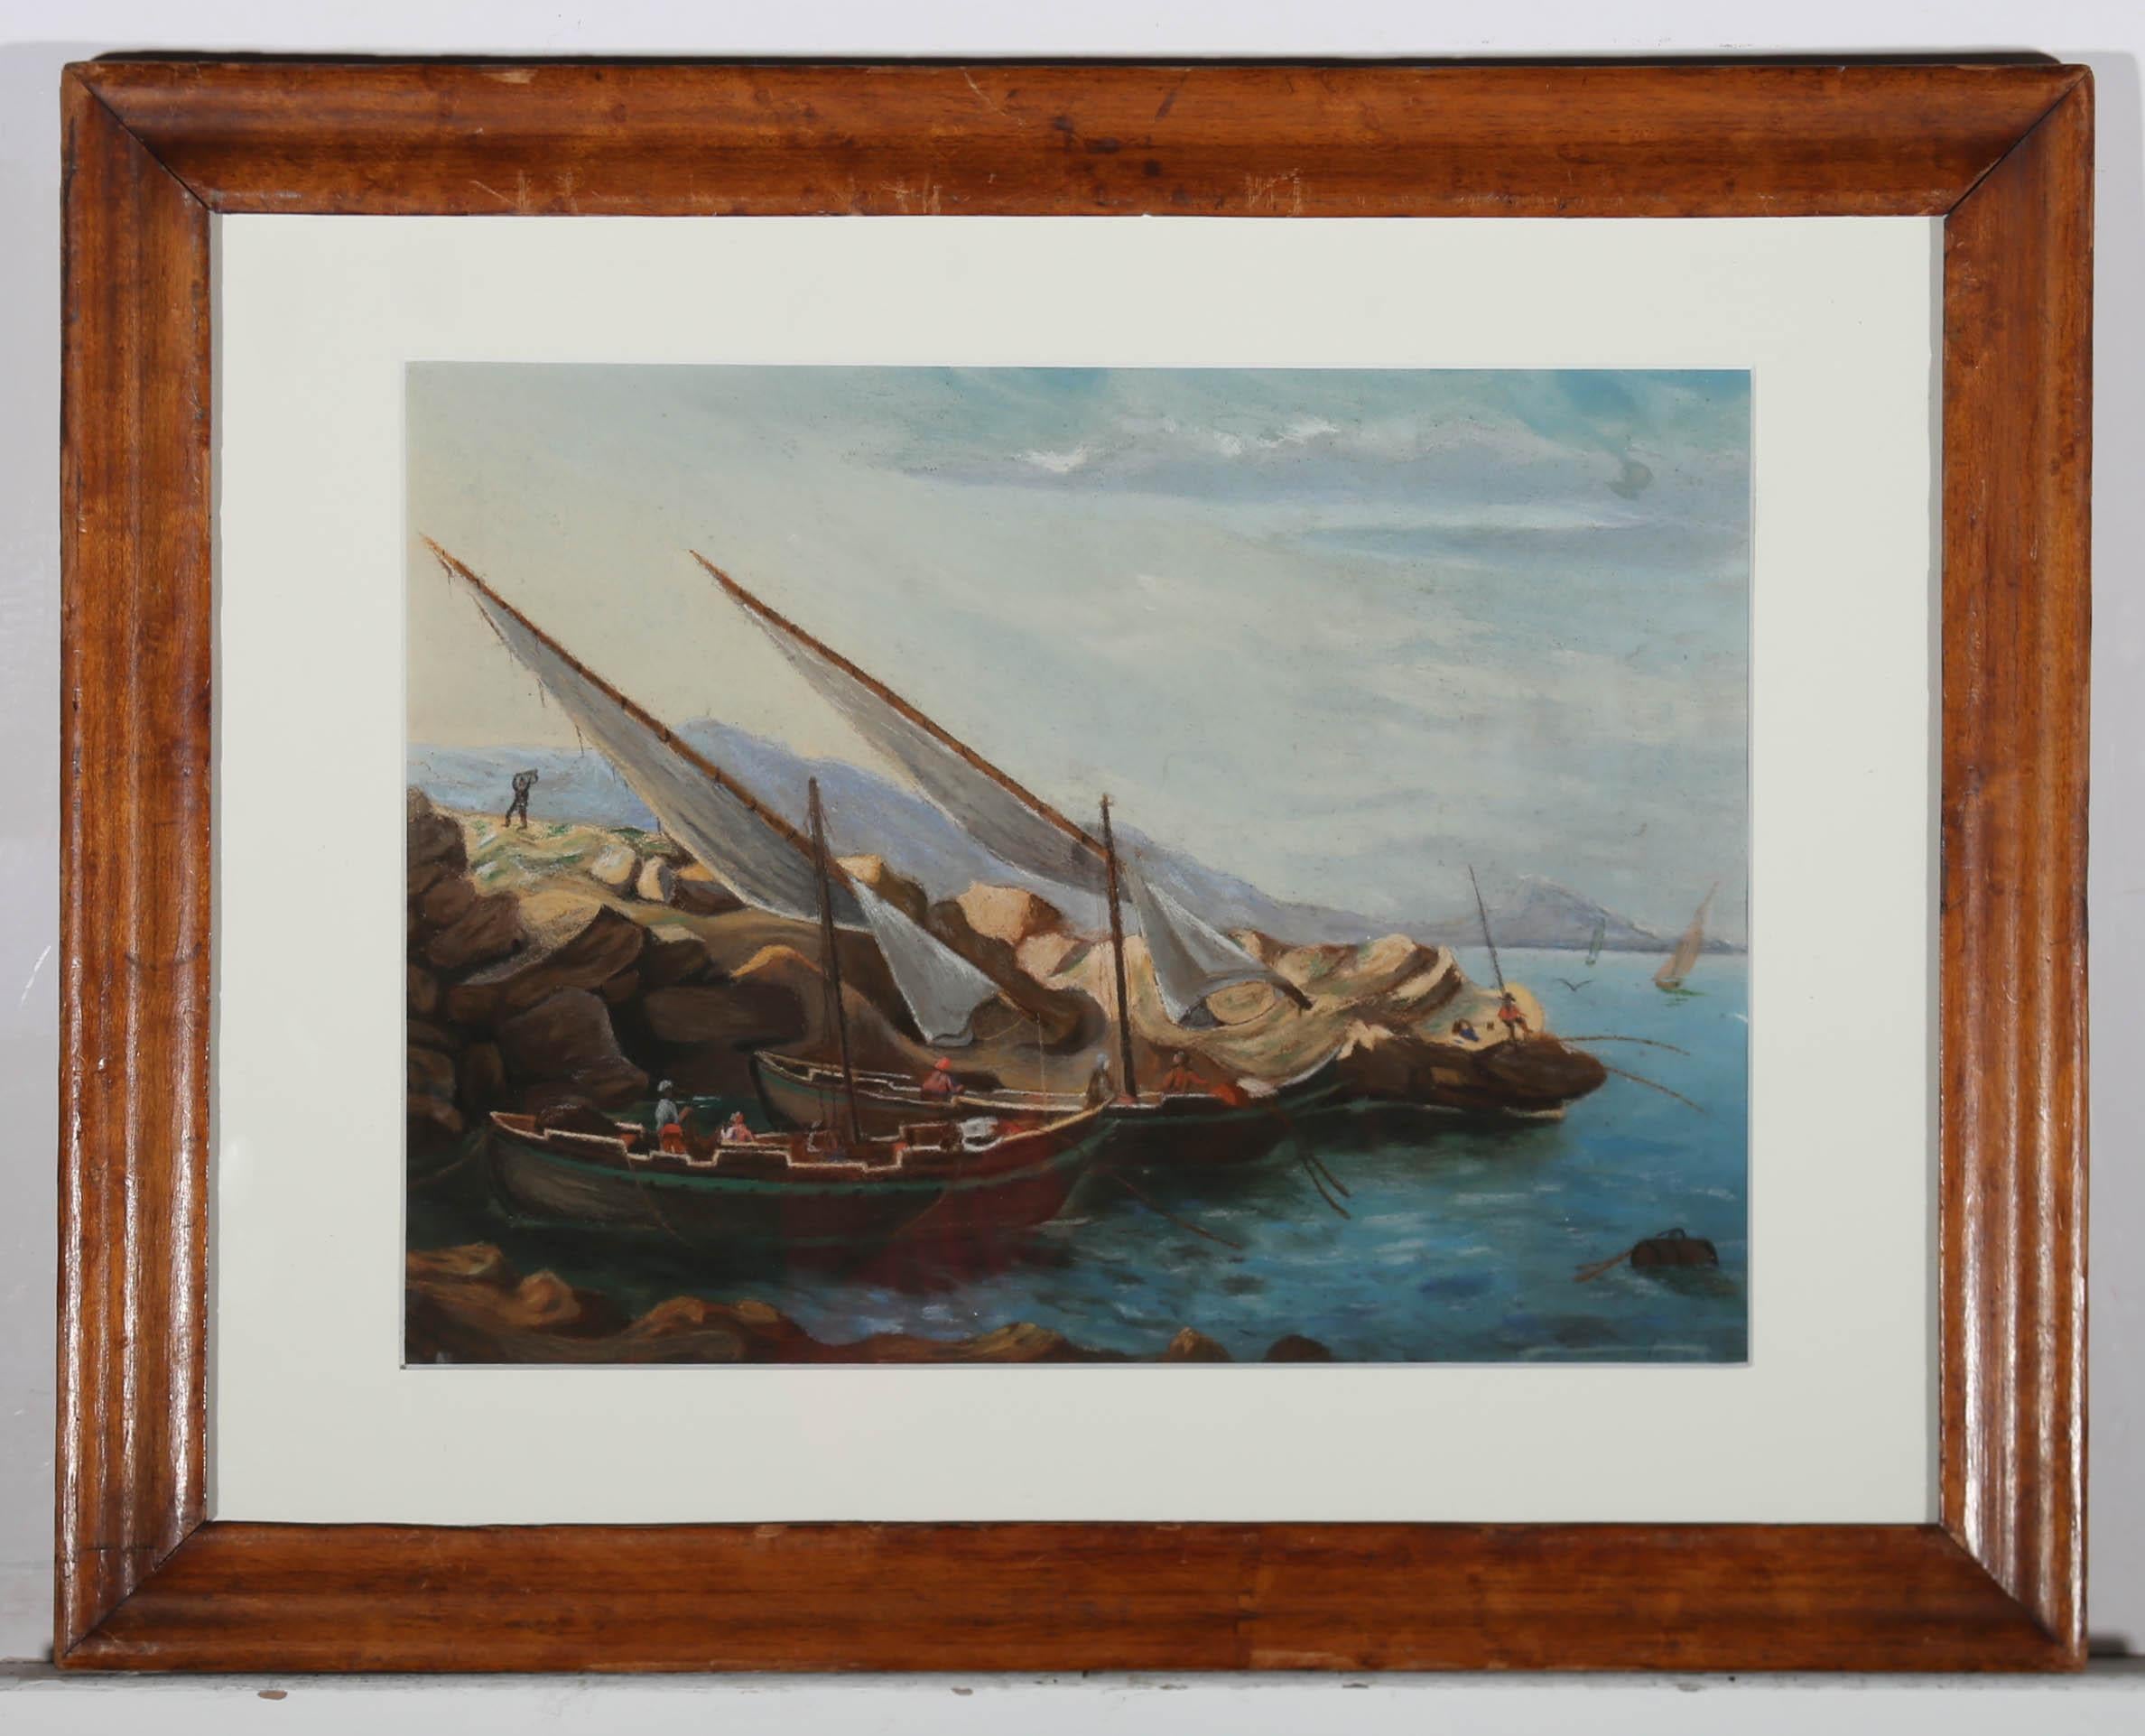 This charming seascape depicts several Italian fishermen, readying boats in a rocky quay. Well presented in a beautiful veneer maple frame with a crisp white mount. Indistinctly signed. On paper. 
